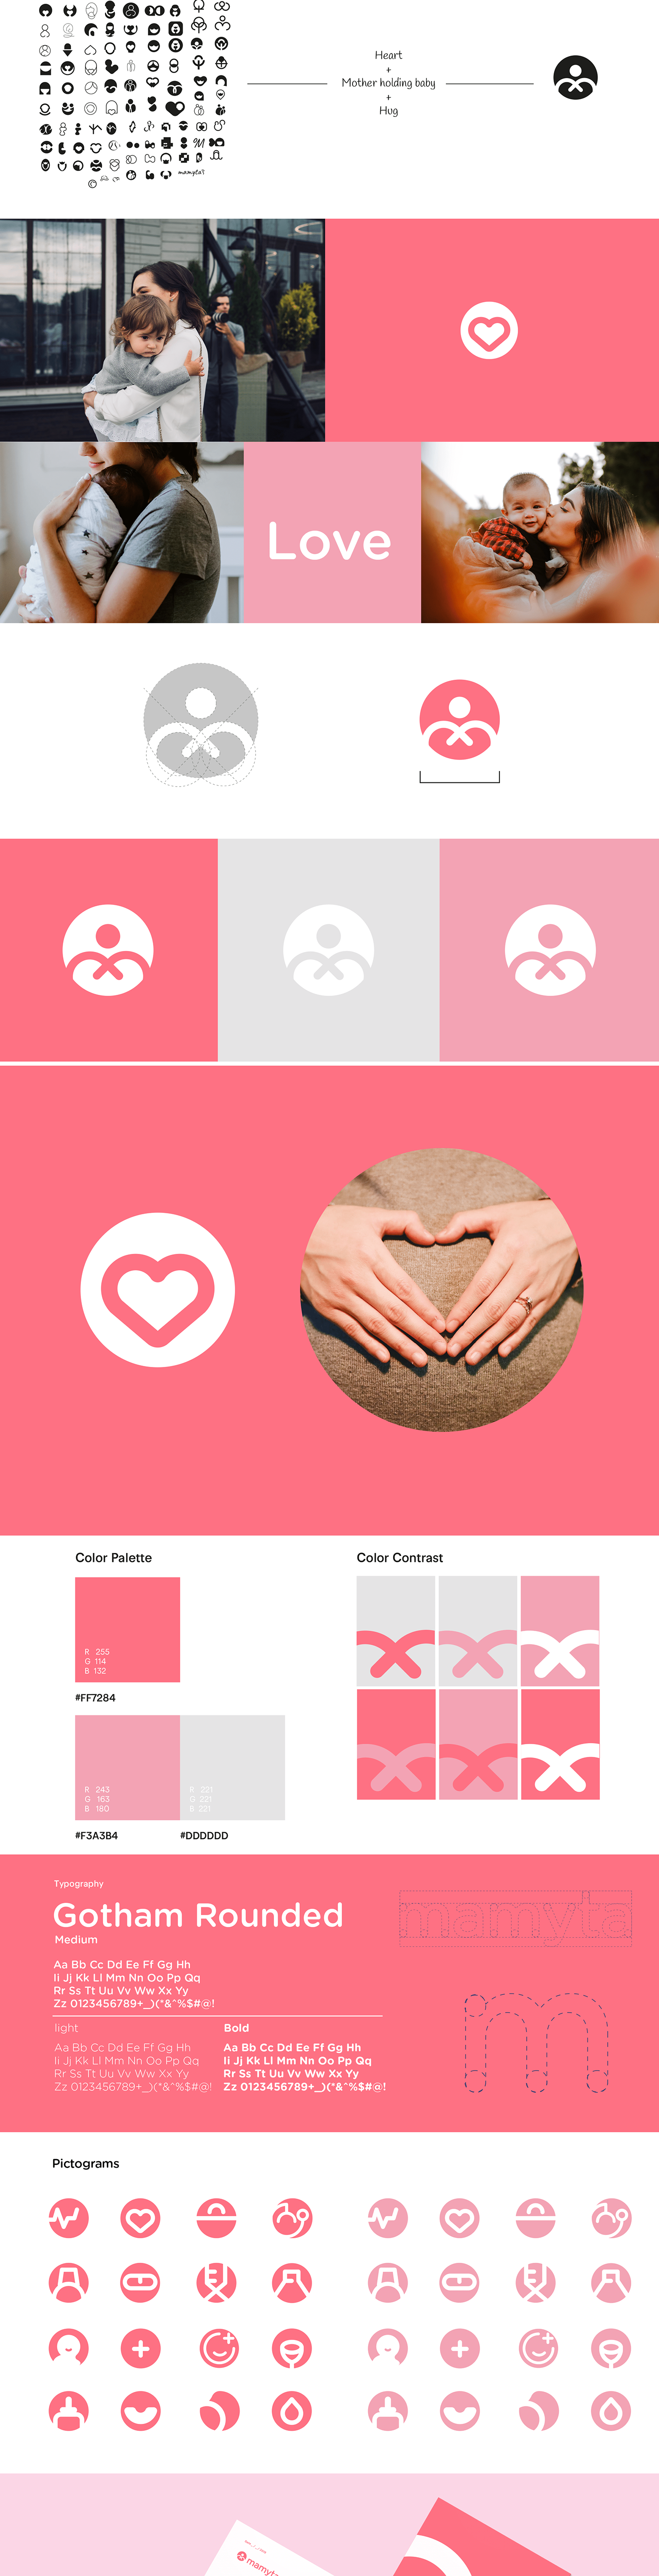 health care doctors Medical app consultations brand identity